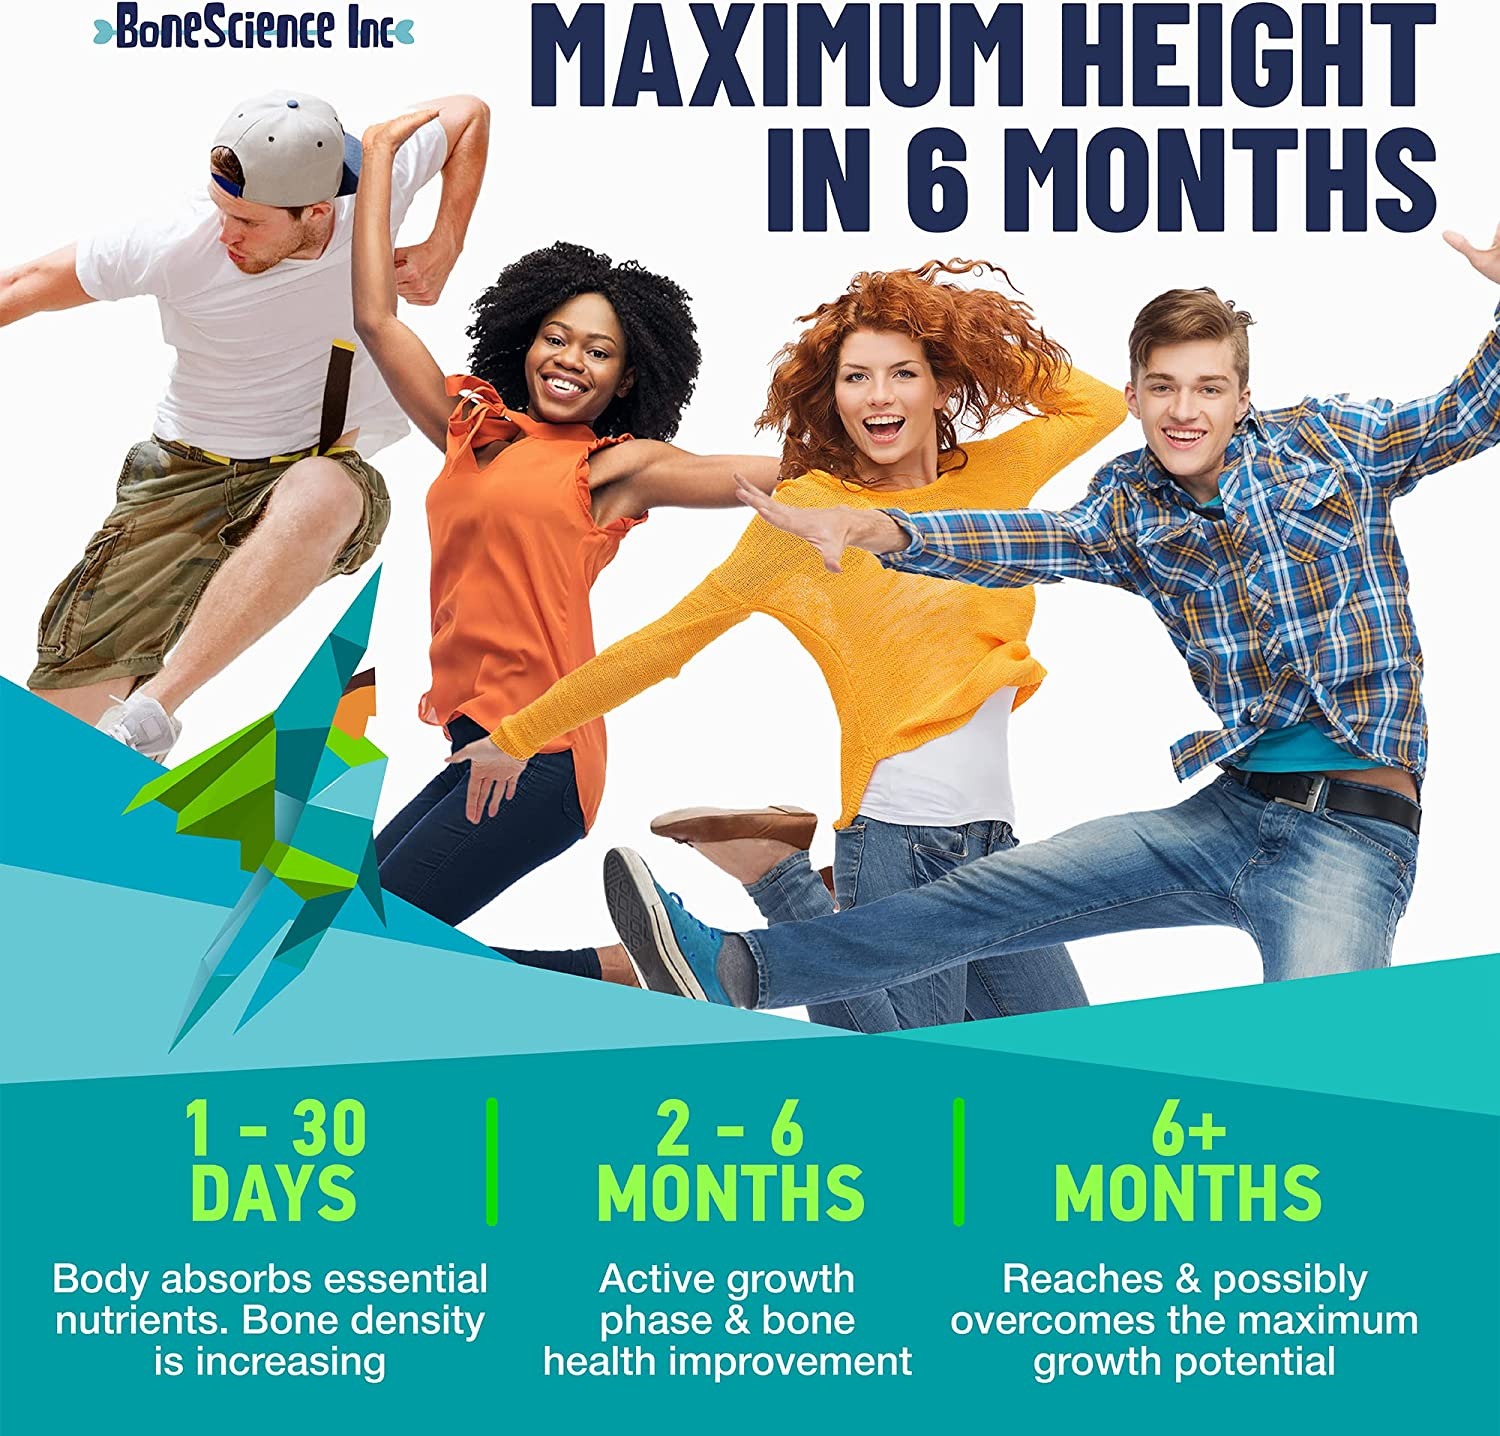 Height Growth Maximizer Advertised to Transform the Body in 6 Months